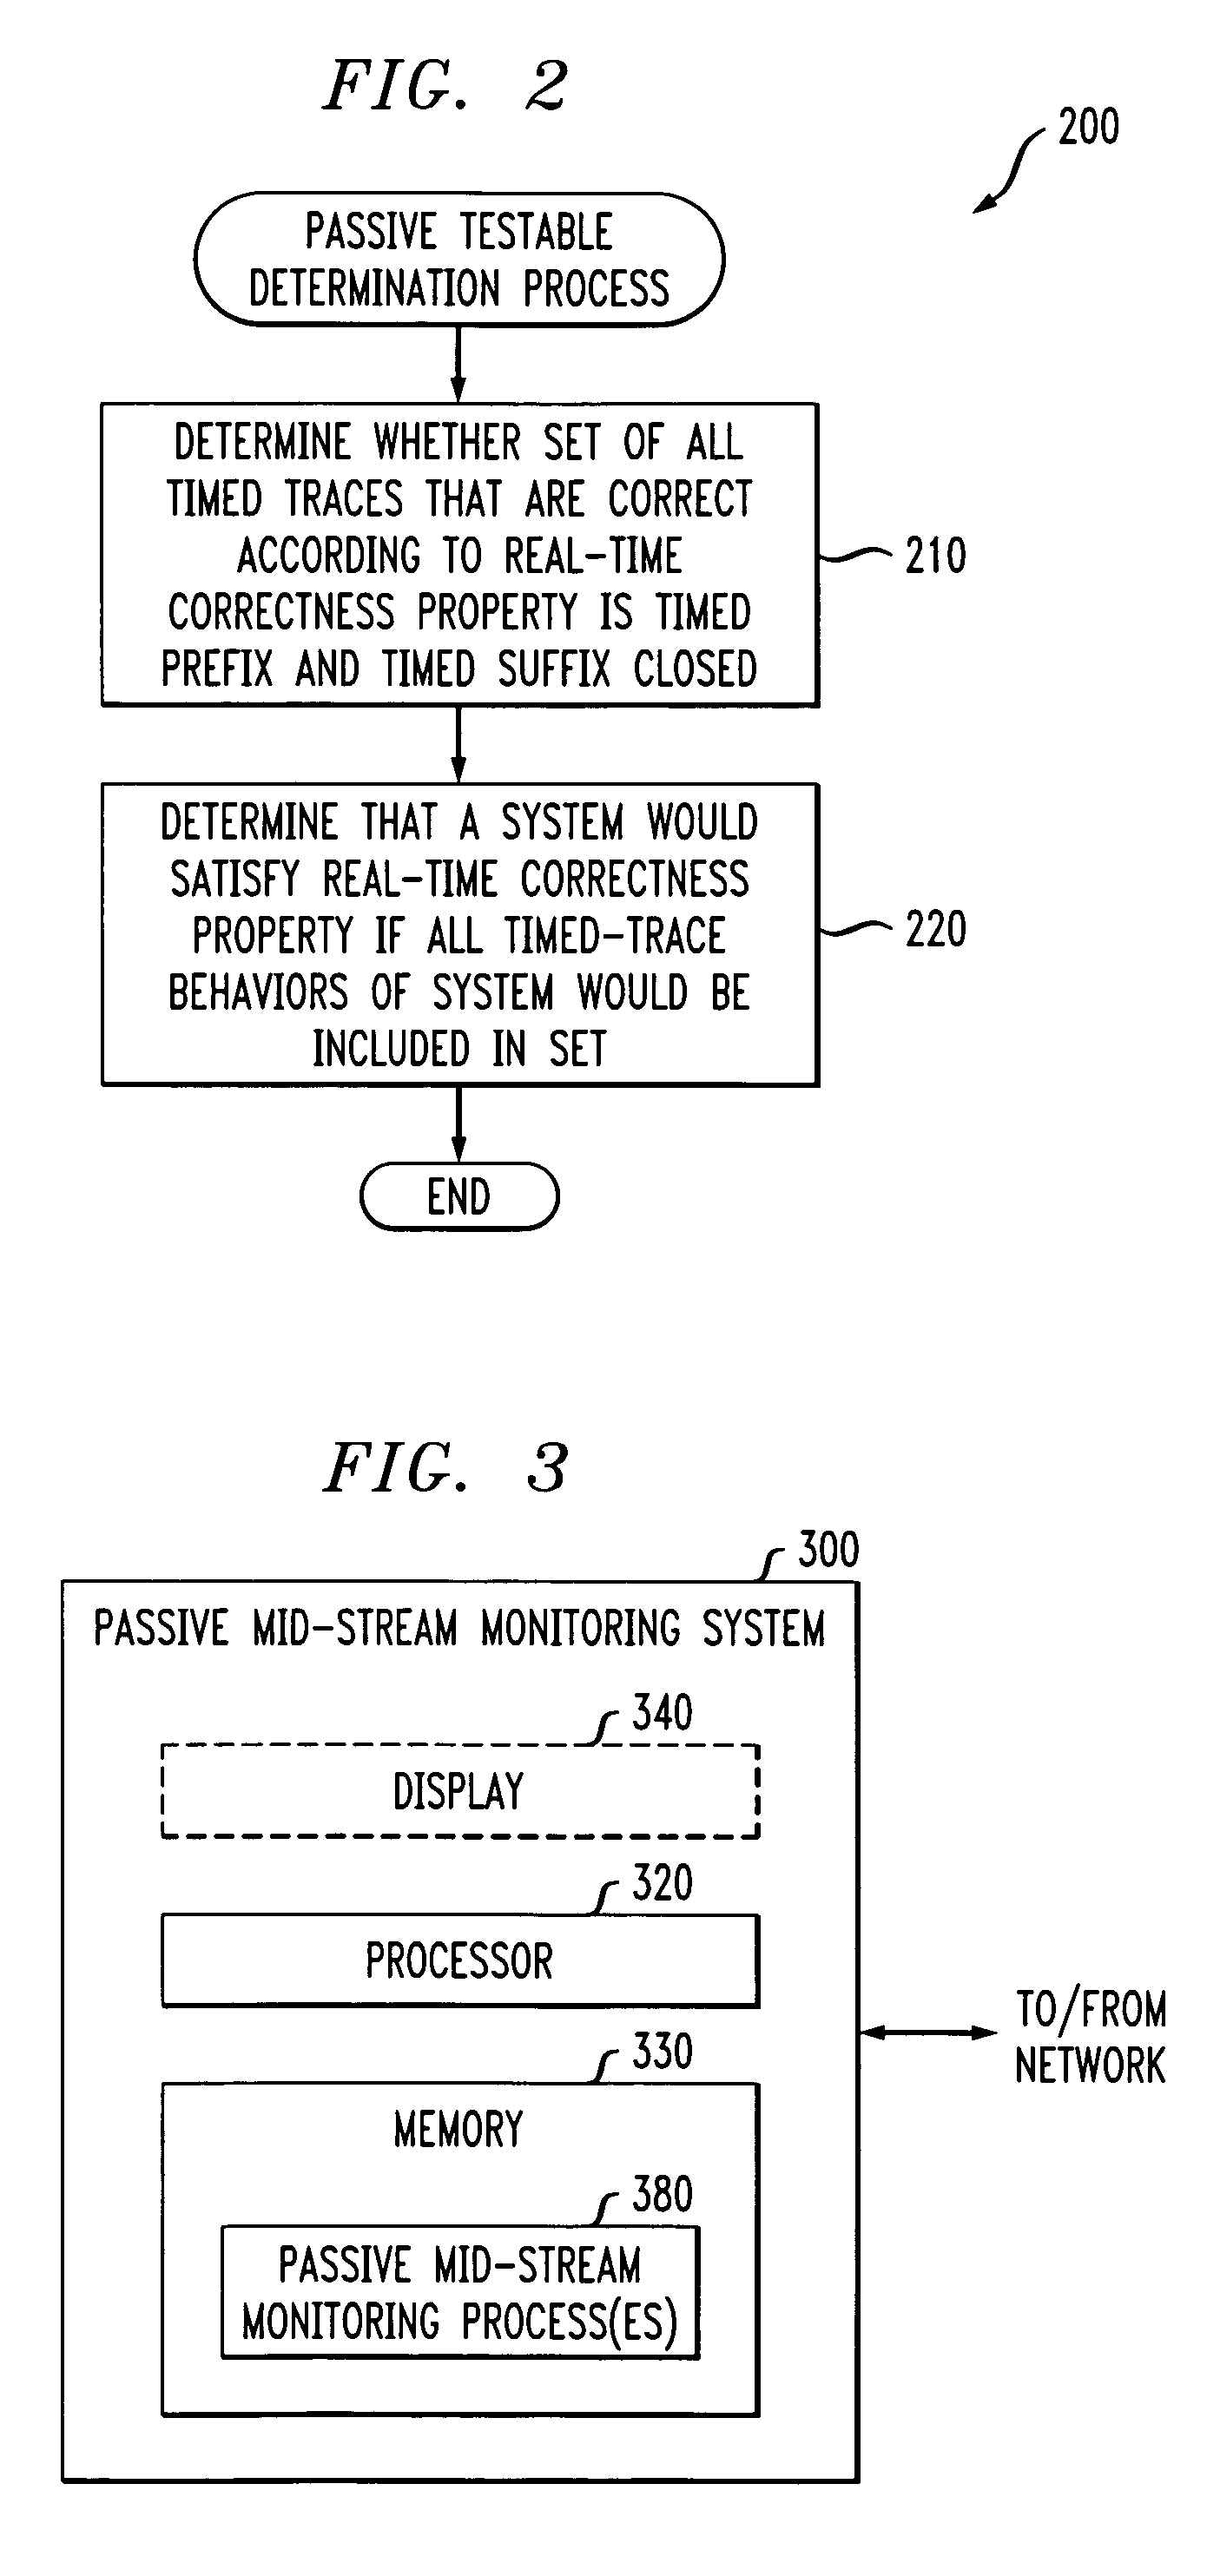 Methods and apparatus for passive mid-stream monitoring of real-time properties